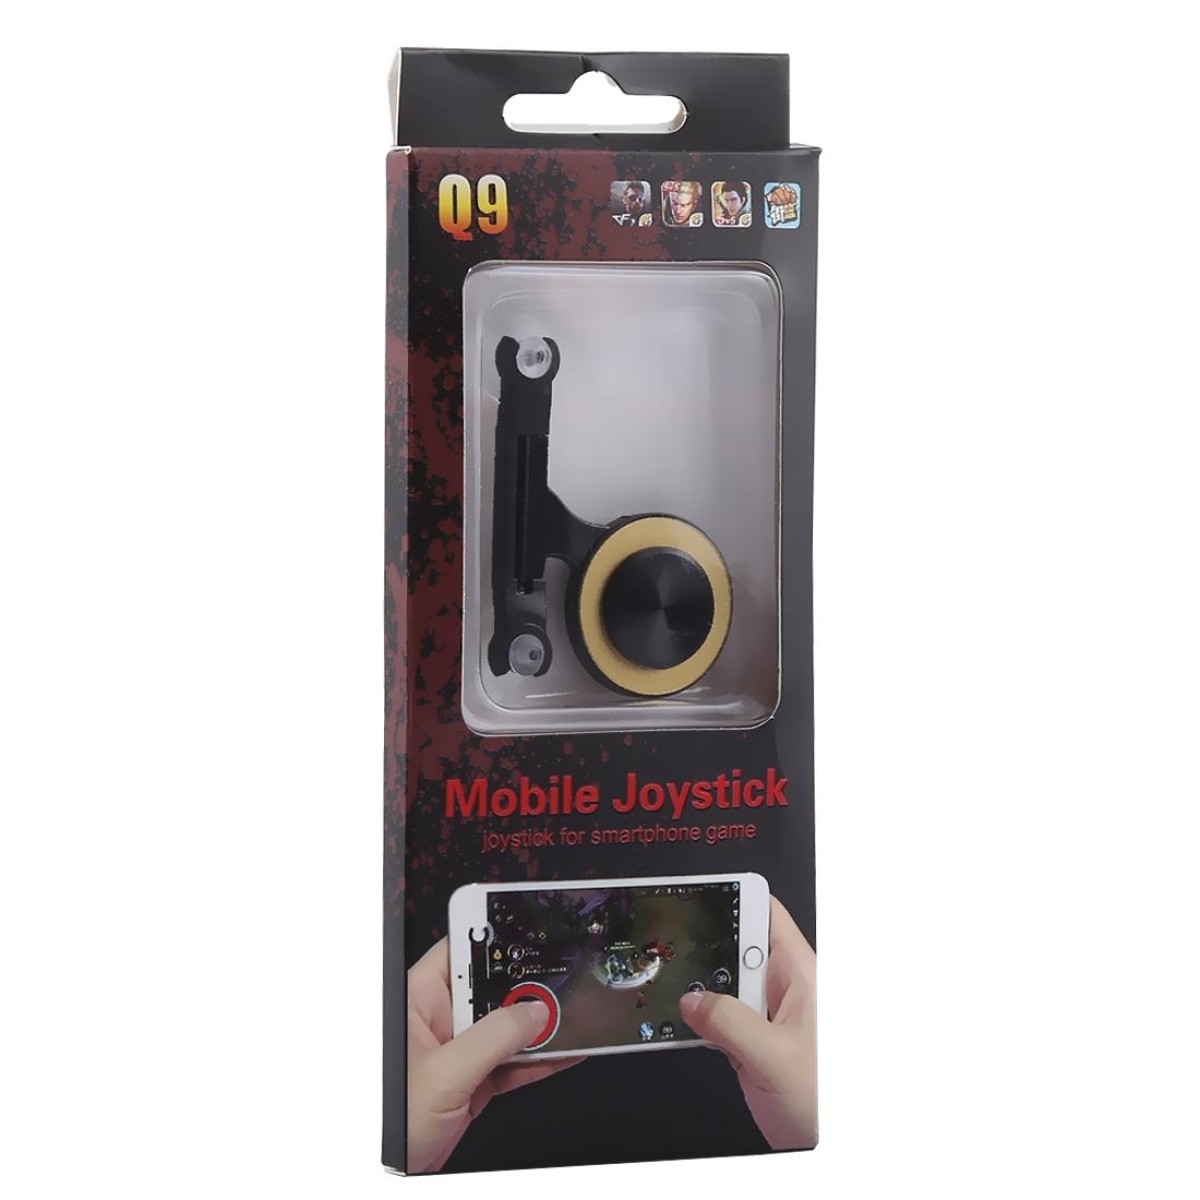 Q9 Direct Mobile Games Joystick Artifact Hand Travel Button Sucker for iPhone, Android Phone, Tablet(Gold)